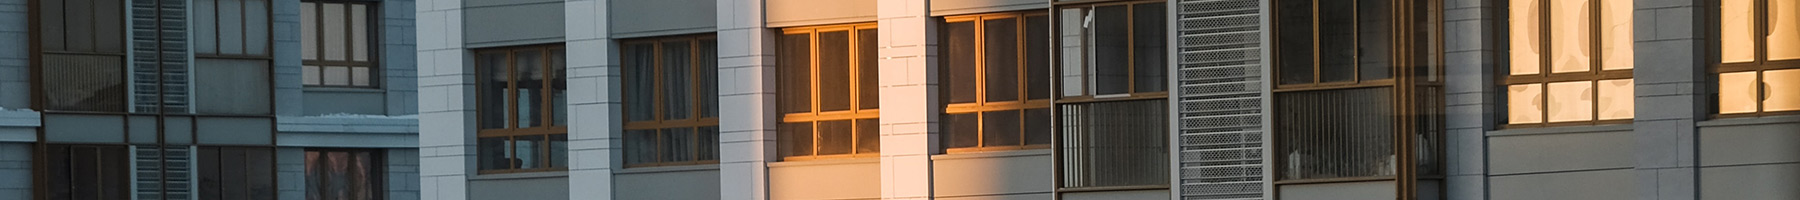 early morning sunlight shining on the windows of city apartments